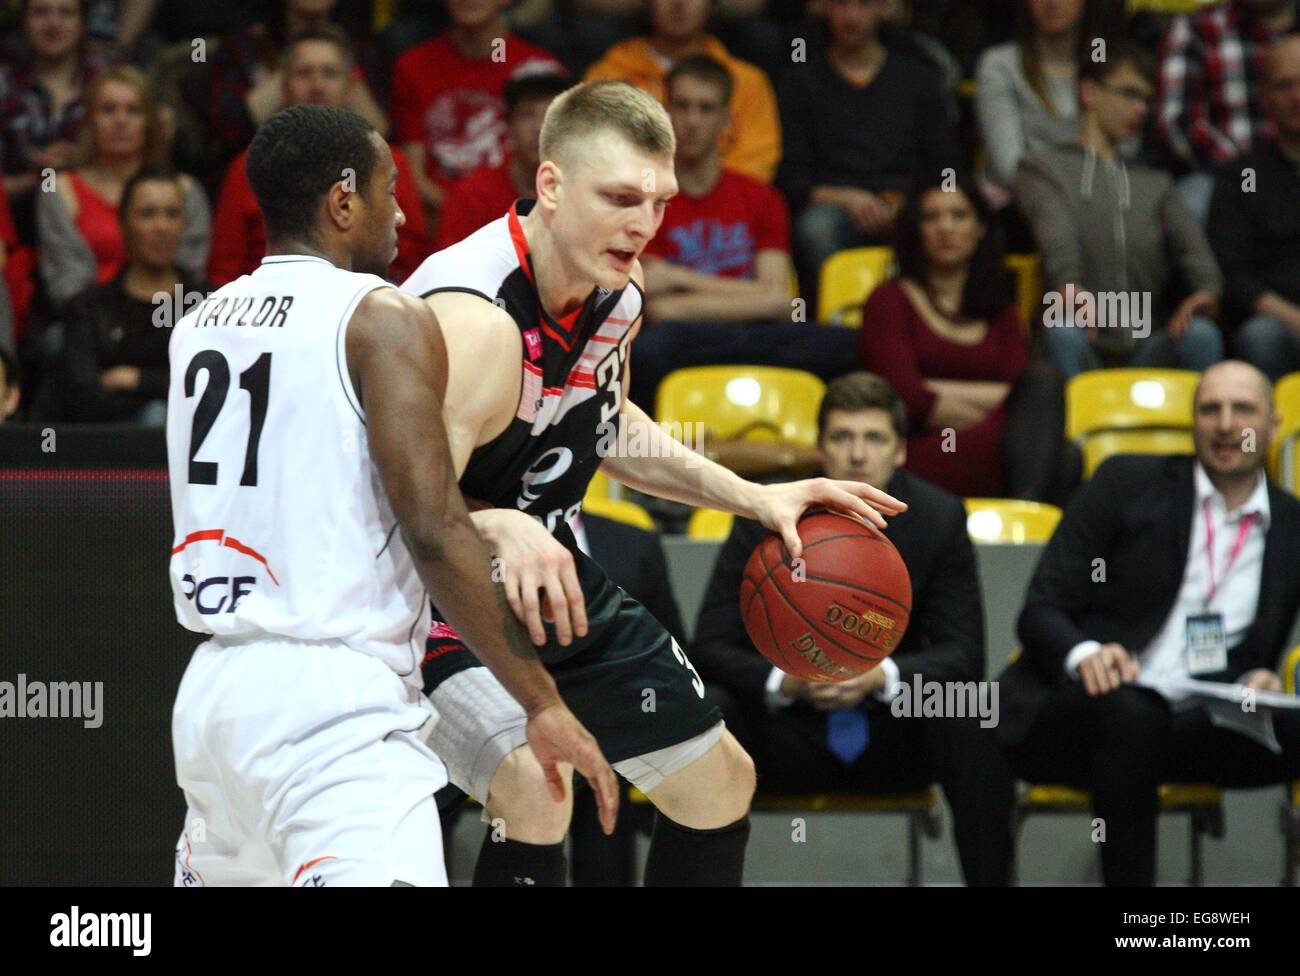 Gdynia, Poland. 19th February, 2015. Basketball: Cup of Poland final games. PGE Turow Zgorzelec faces energa Czarni Slupsk at Gdynia Arena sports hall. Karol Gruszecki (33) in action against Tony Taylor (21 during the game Credit:  Michal Fludra/Alamy Live News Stock Photo